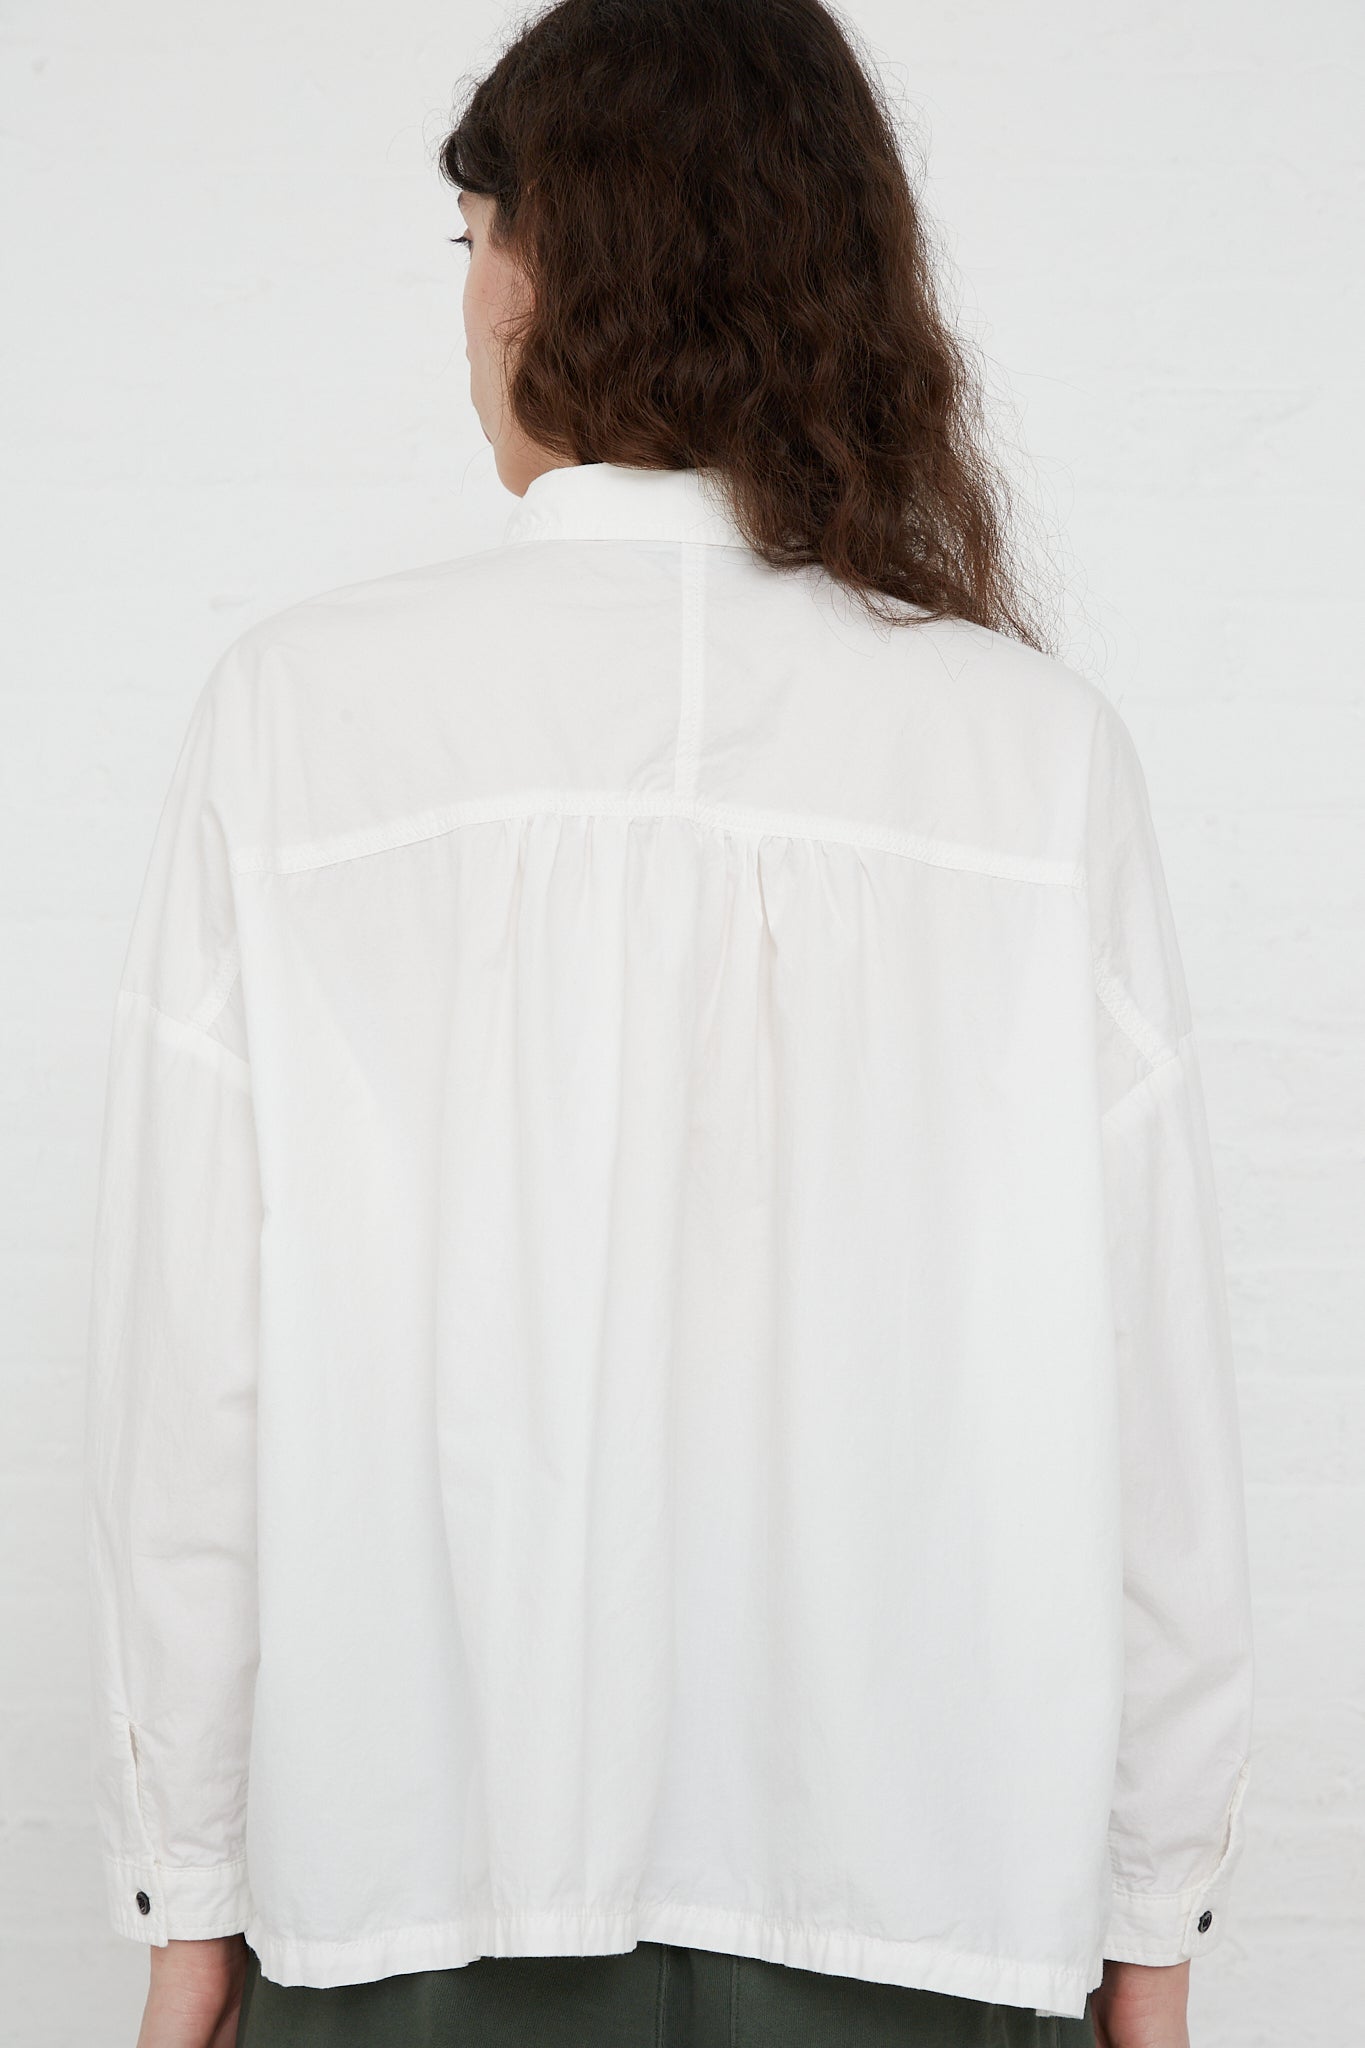 The back view of a woman wearing an Ichi Antiquités Woven Cotton Oumisarashi Shirt in White, made of natural fibers, specifically woven cotton.